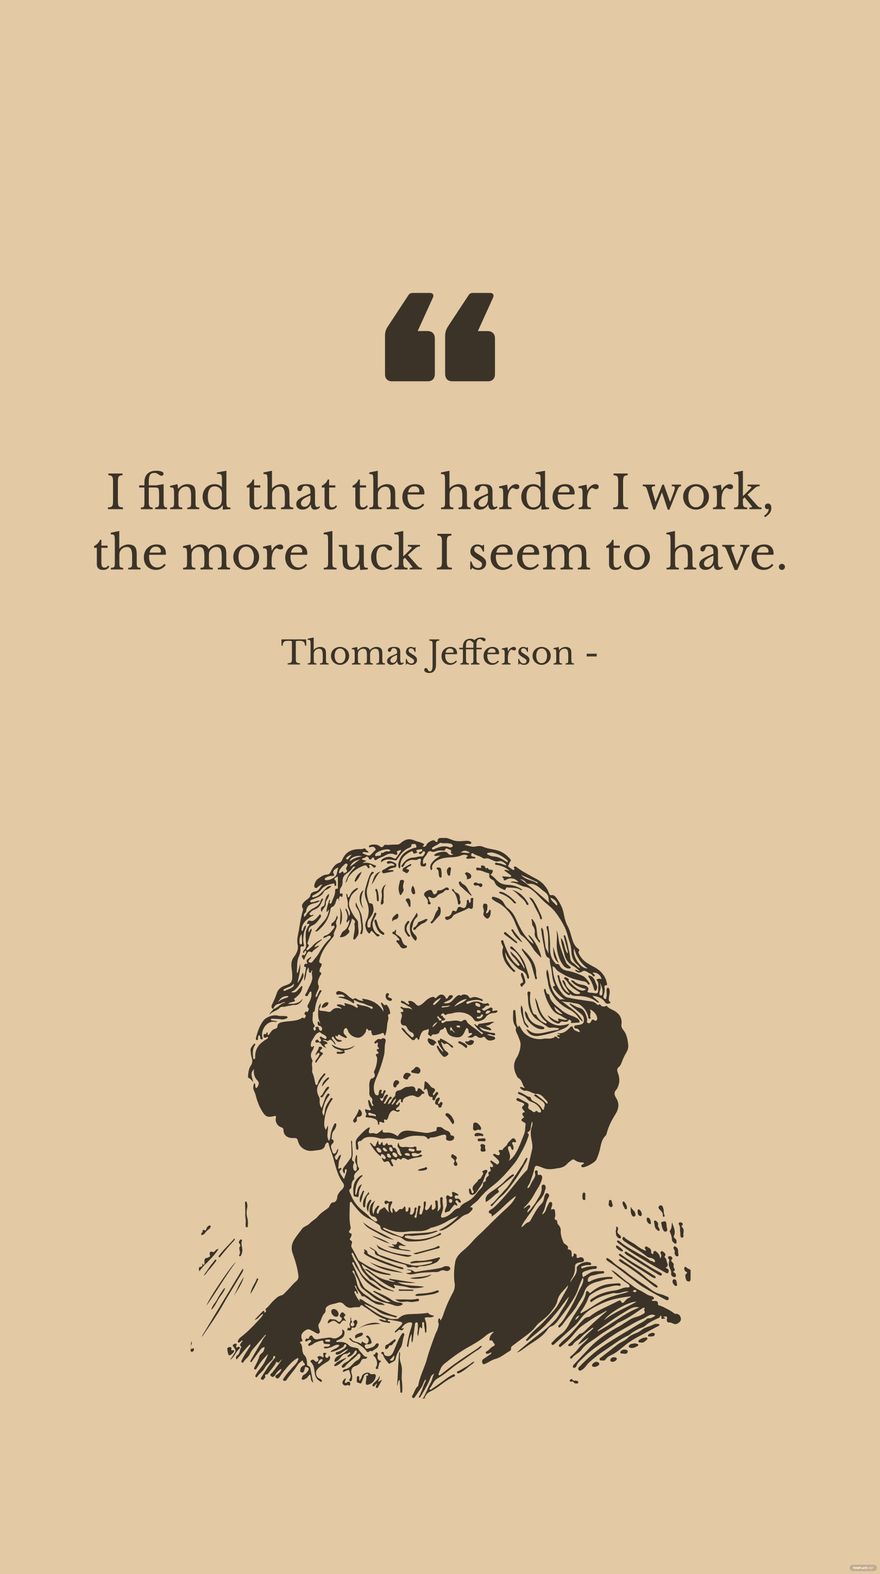 Free Thomas Jefferson - I find that the harder I work, the more luck I seem to have.